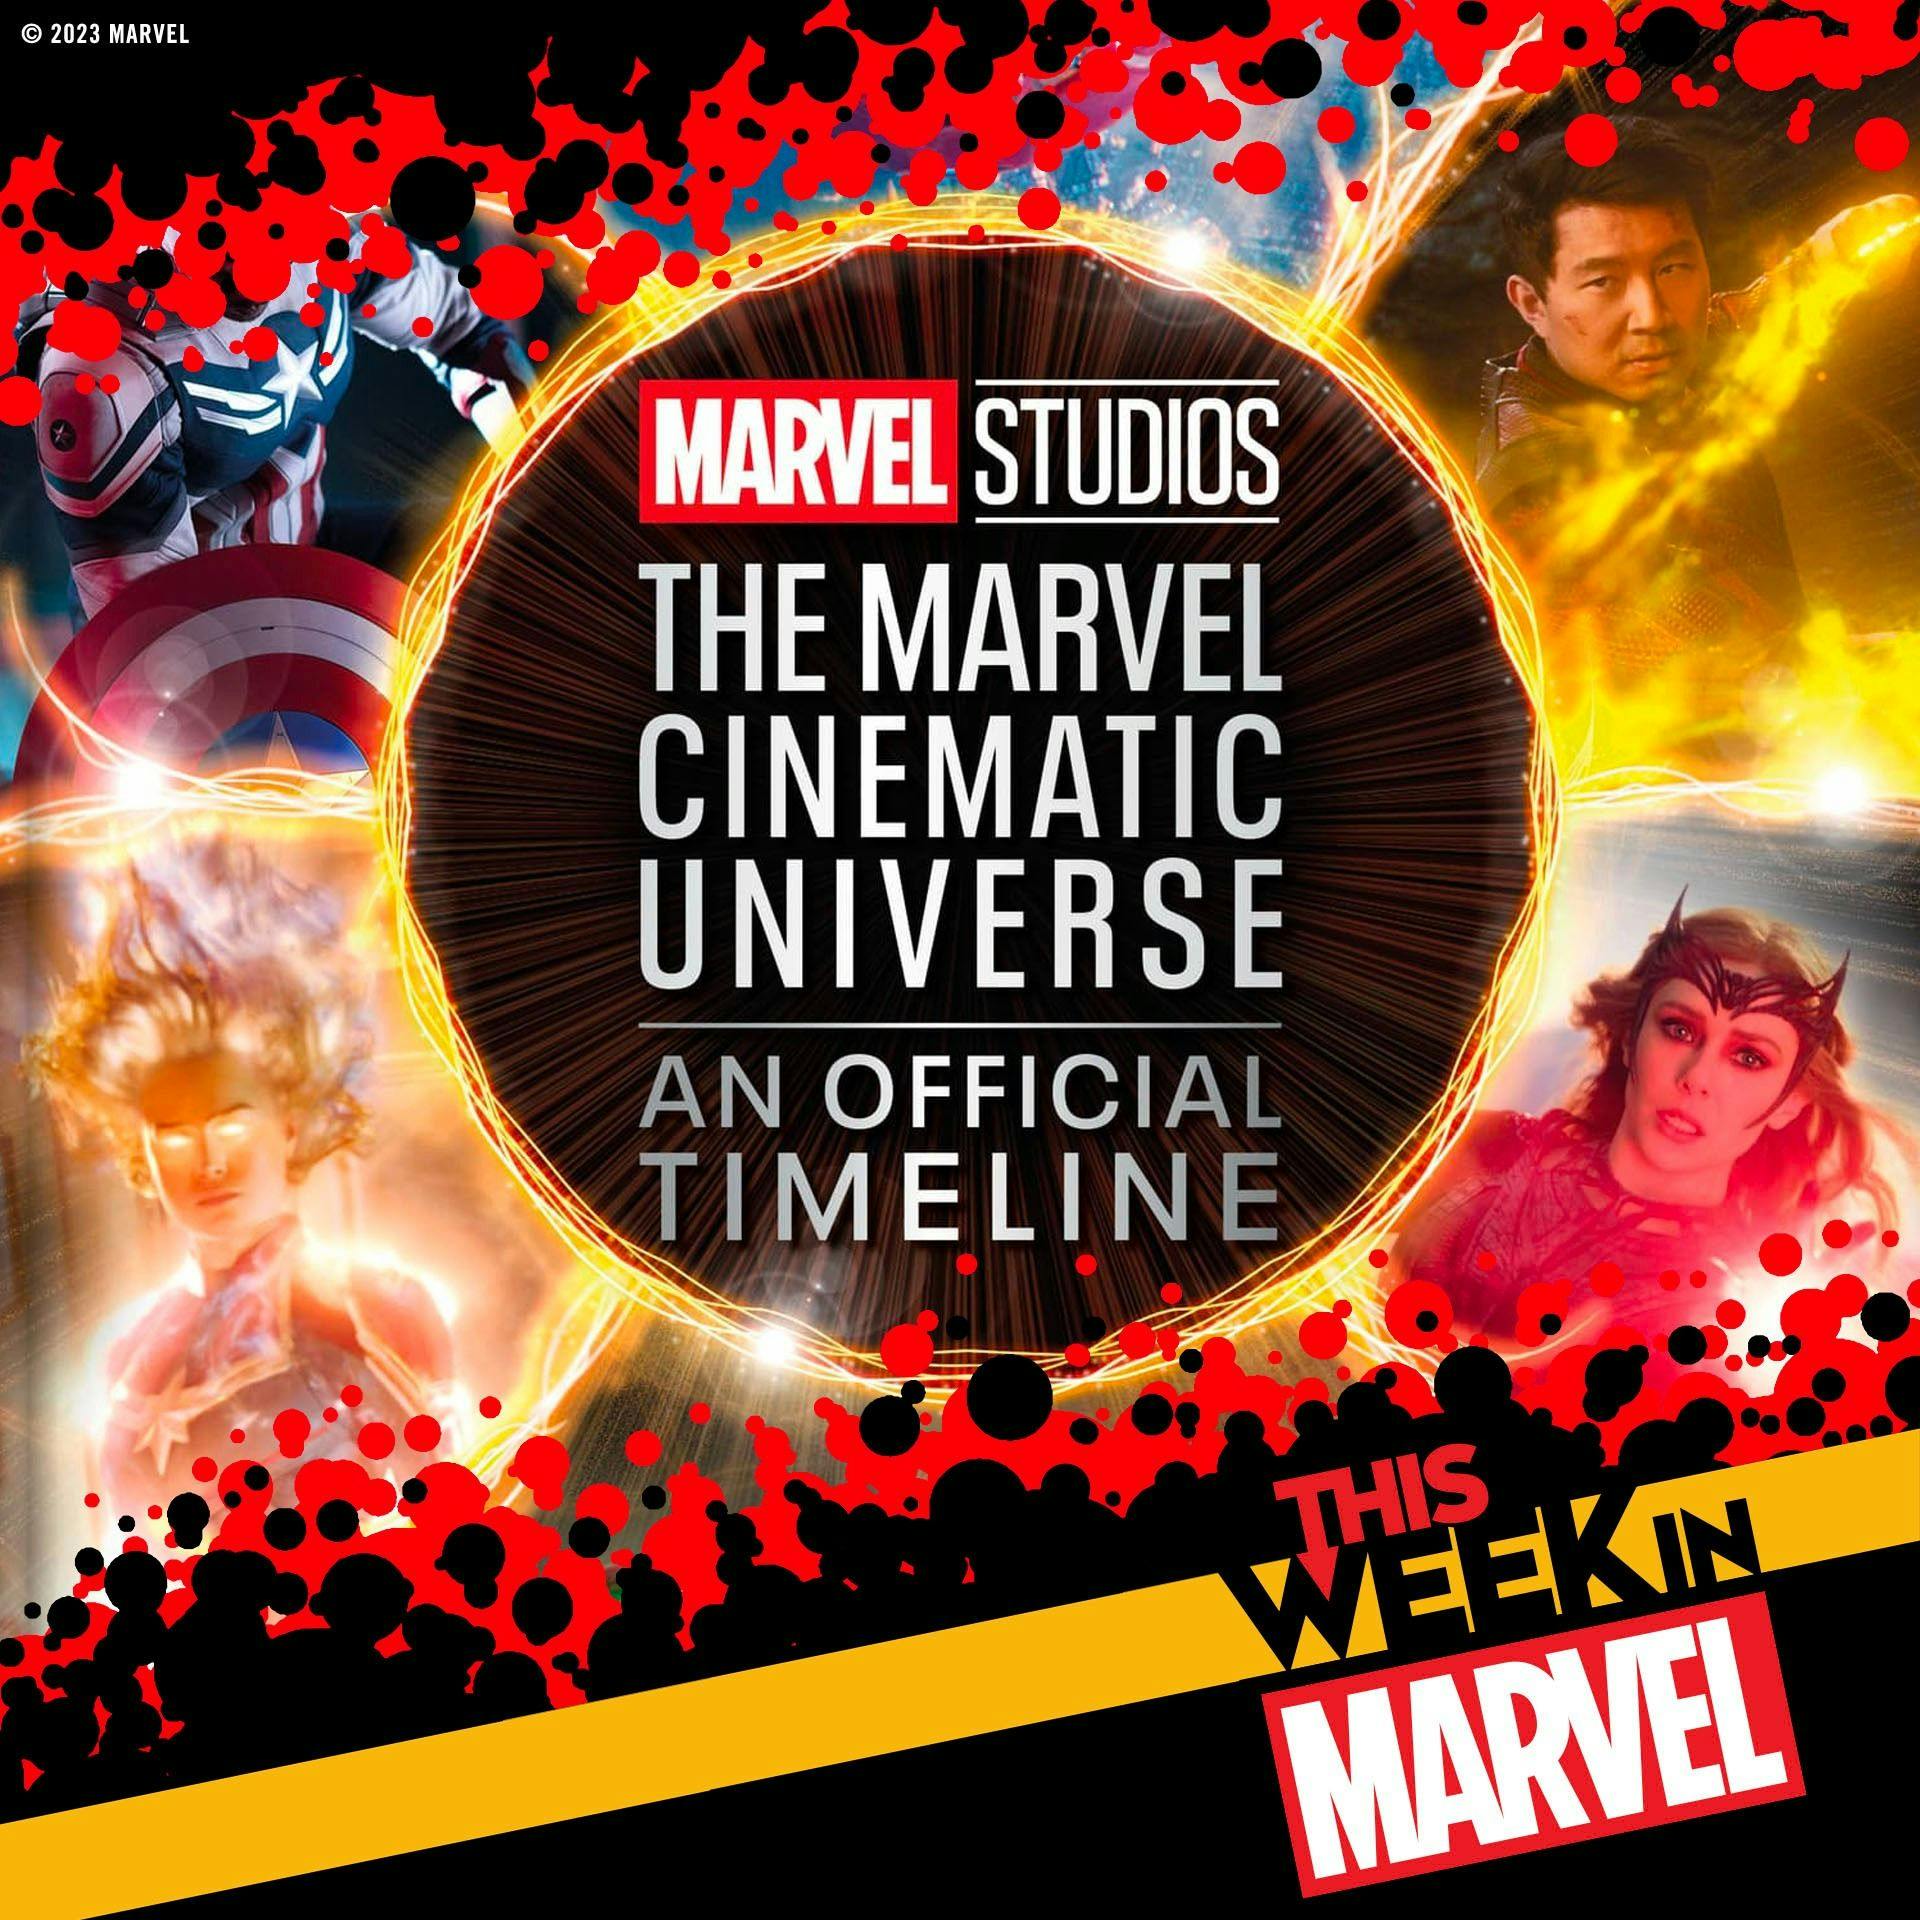 MCU Timeline Deep Dive, Marvel x Magic: The Gathering, Lego Marvel’s Avengers, and more!